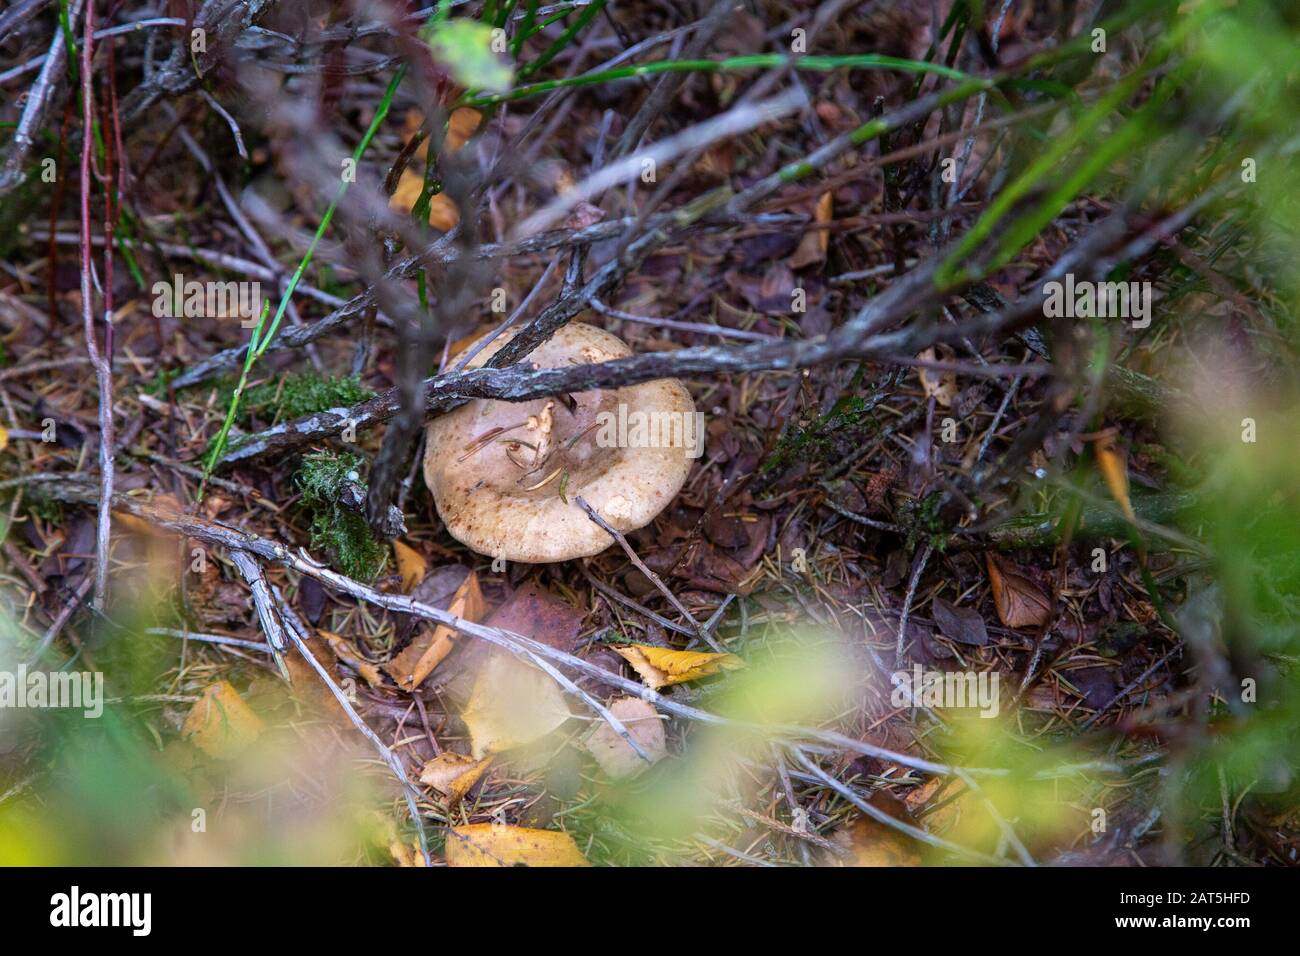 A mushroom hidden under twigs and branches in autumn Stock Photo